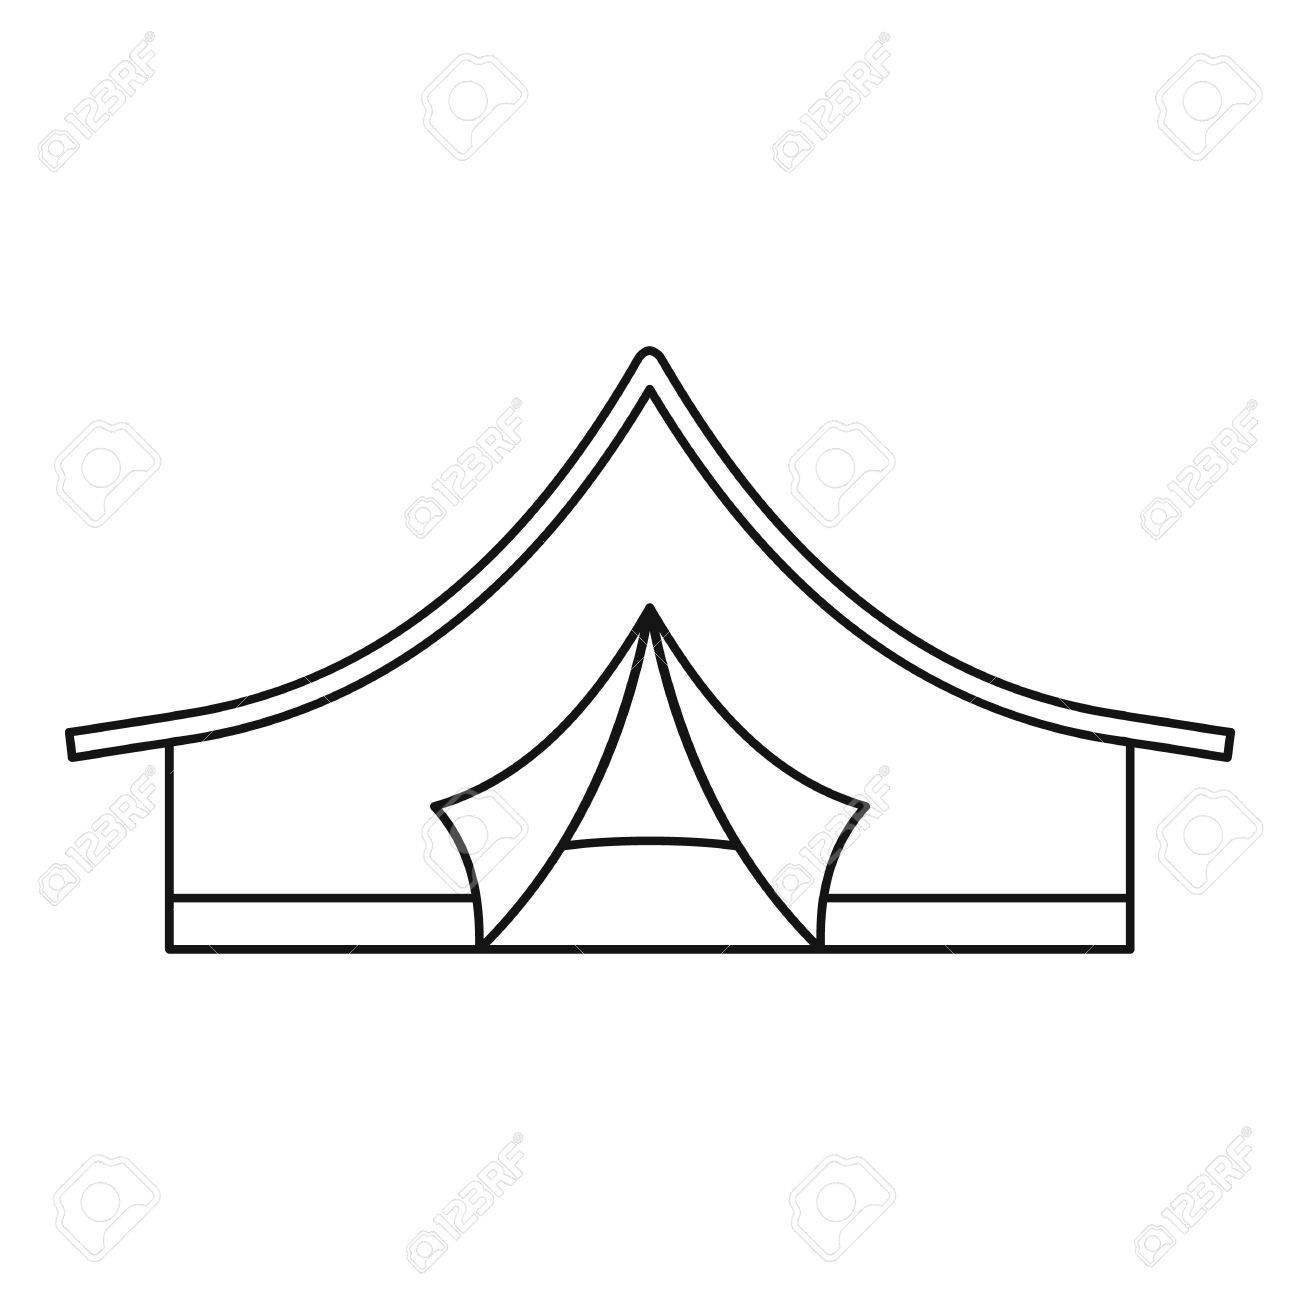 Tent Outline Cliparts Free Download Clip Art.